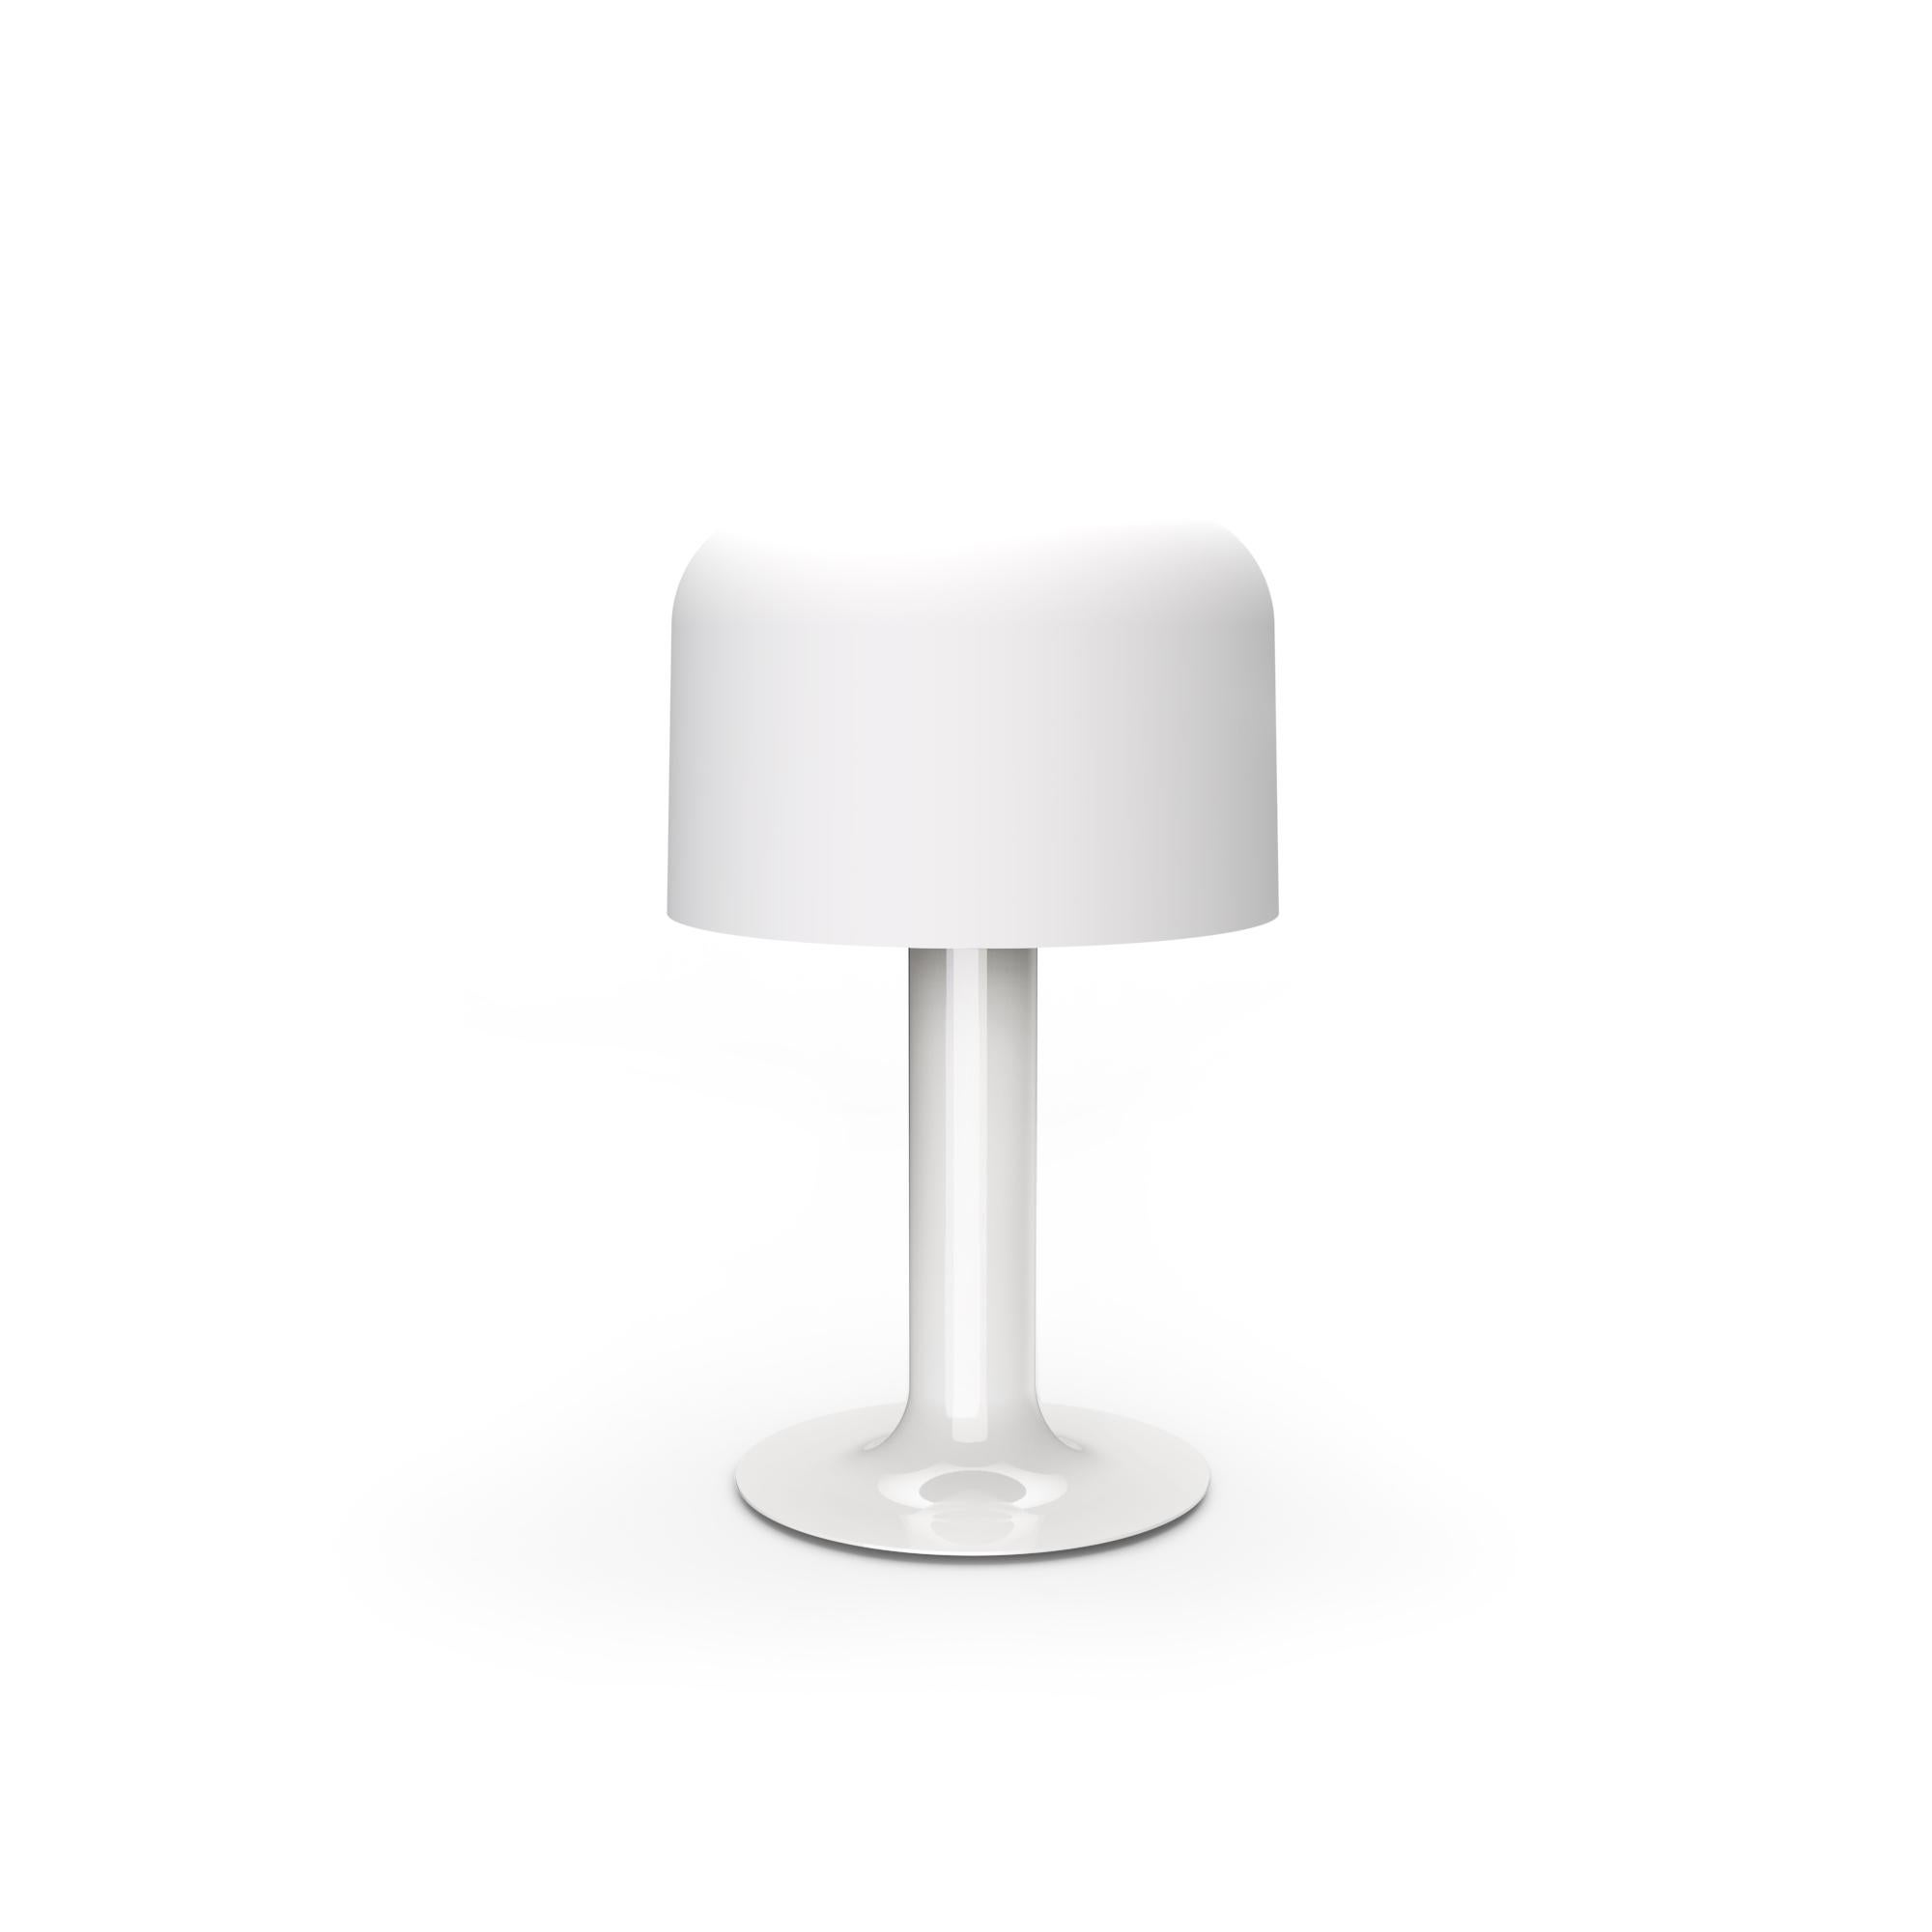 Michel Mortier 10497 metal and glass table lamp for Disderot in white.

Originally designed in 1972, this sculptural table lamp is a newly produced numbered edition with an authentication certificate. Made in France by Disderot with many of the same